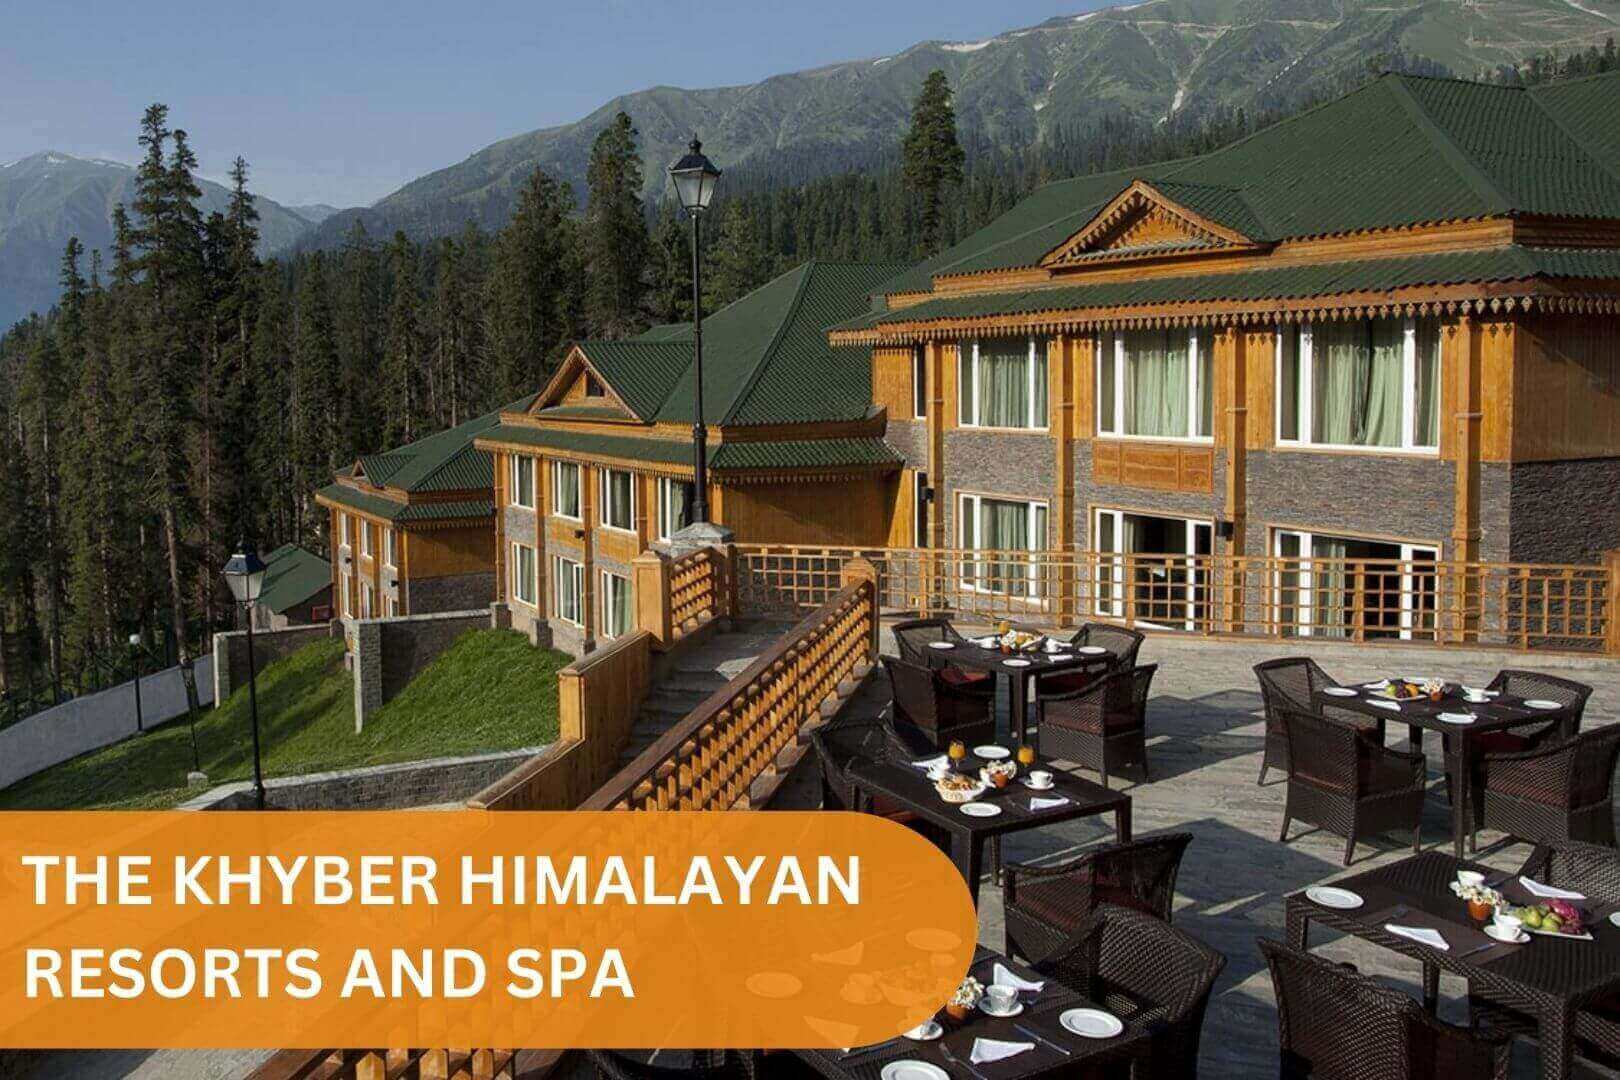 THE KHYBER HIMALAYAN RESORTS AND SPA, auli ski resort, skiing price in india, skiing packages in india, best ski resorts in india, gulmarg ski resort, ski resort manali, skiing in sikkim, luxury snow resorts india, ski resorts in india, indian ski resorts, best ski resorts in india, ski resorts india, skiing india, ski resort in india, ski resort india, skiing in india, india ski resorts, best place for skiing in india, best place to ski in india, best places to ski in india, best skiing places in india, ski india, ice skiing in india, skiing resort in india, solang ski resort, india ski resort, skiing resorts in india, ski resorts in the himalayas, skiing destinations in india, snow resorts in india, india skiing, try ski, best ski resort in india, skiing places in india, ski in india, snow skating in india, mountain resort in india, fagu ski resort, sking in india, best mountain resorts in india, ski resort himalayas, best places for skiing in india, snow view mountain resort, snow valley hotels, best places to ski, indian ski, ski places in india, best winter resorts in india, snow skiing in india, india ski, himalayan snow heights, ski resort manali, top snow resorts,